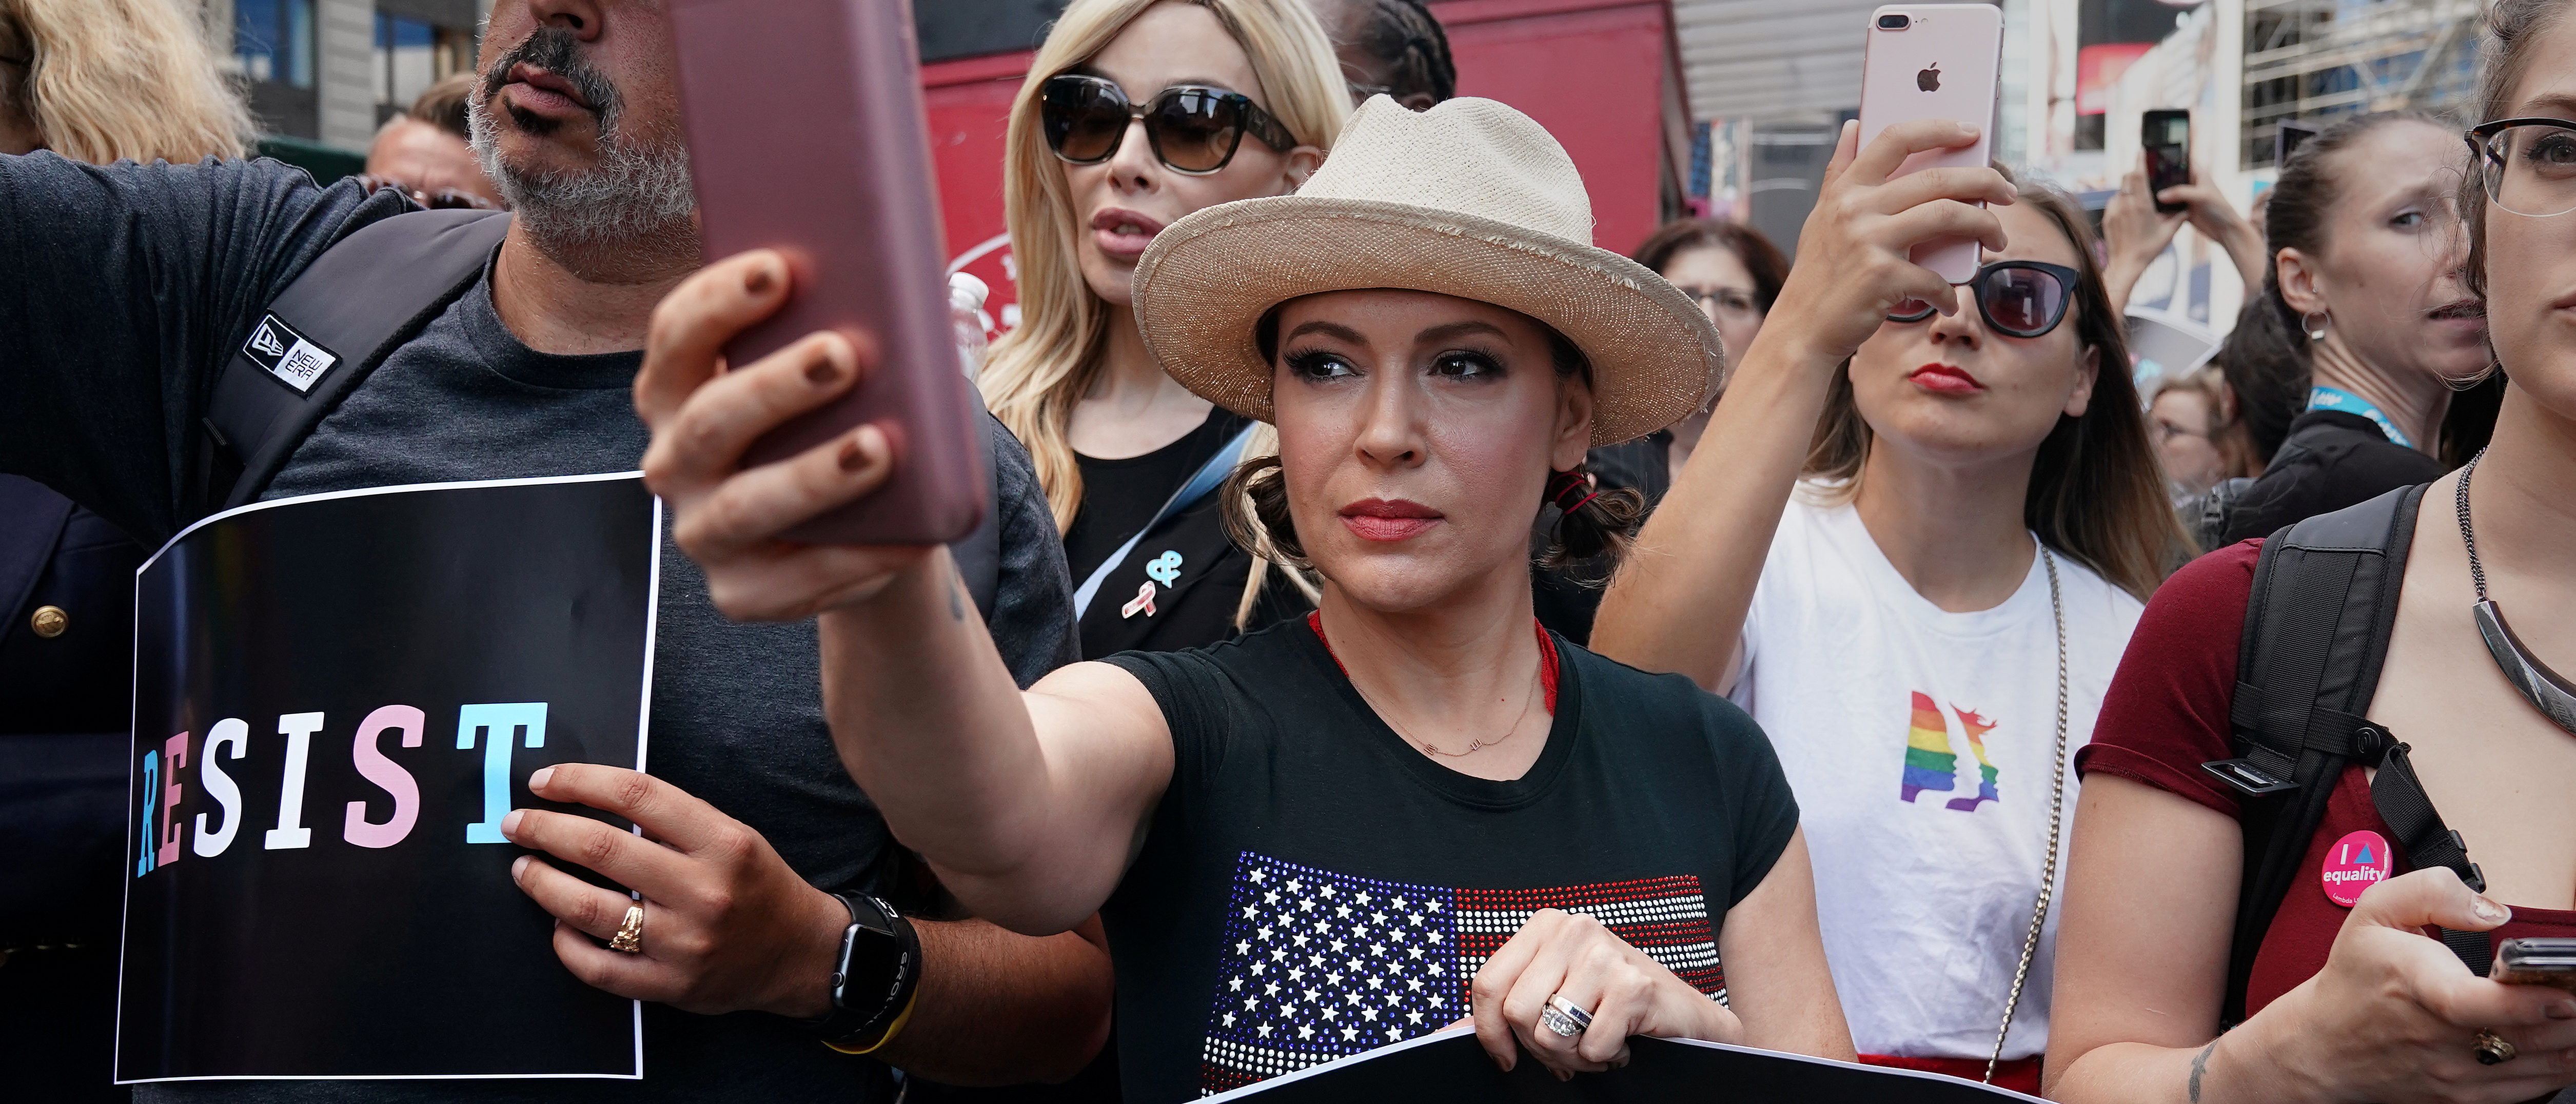 Actress Alyssa Milano attends a protest against U.S. President Donald Trump's announcement that he plans to reinstate a ban on transgender individuals from serving in any capacity in the U.S. military, in Times Square, in New York City, New York, U.S., July 26, 2017. REUTERS/Carlo Allegri - RC1BA409A7E0